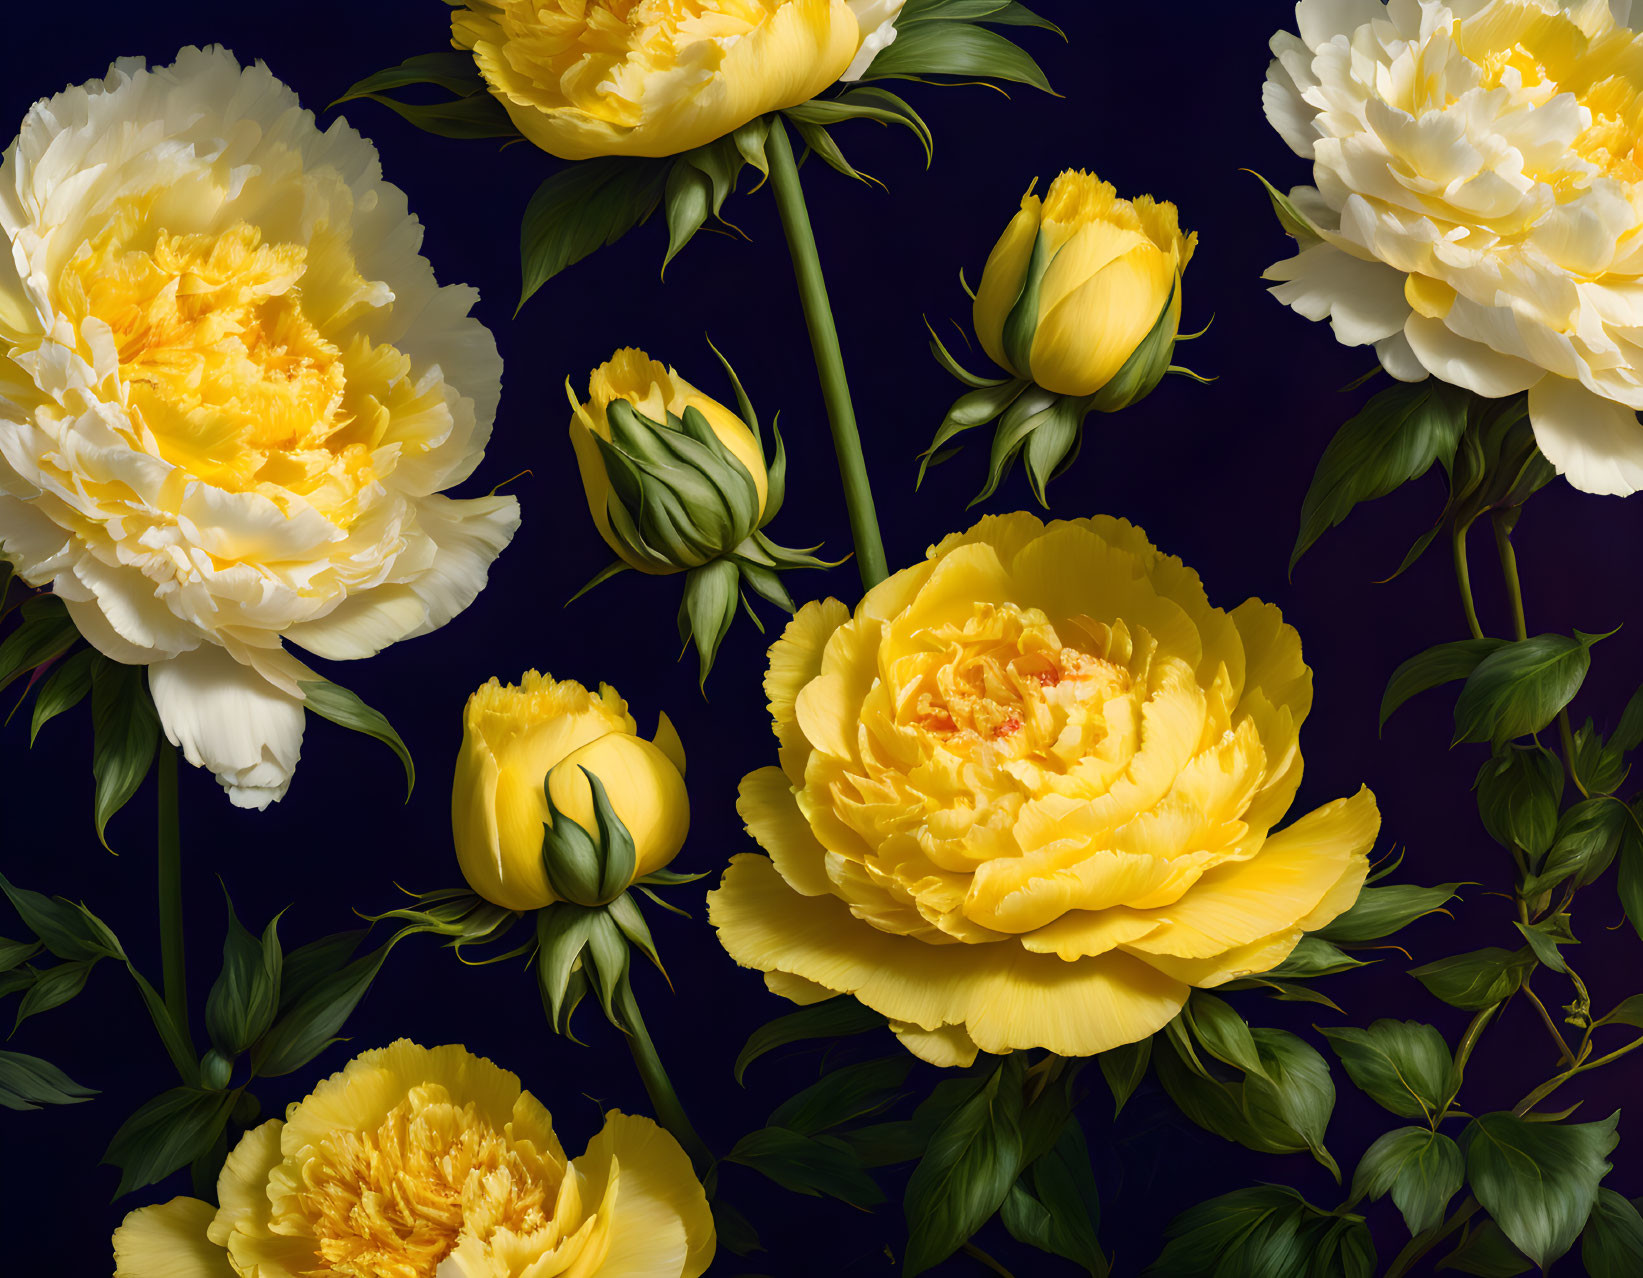  yellow peonies and roses